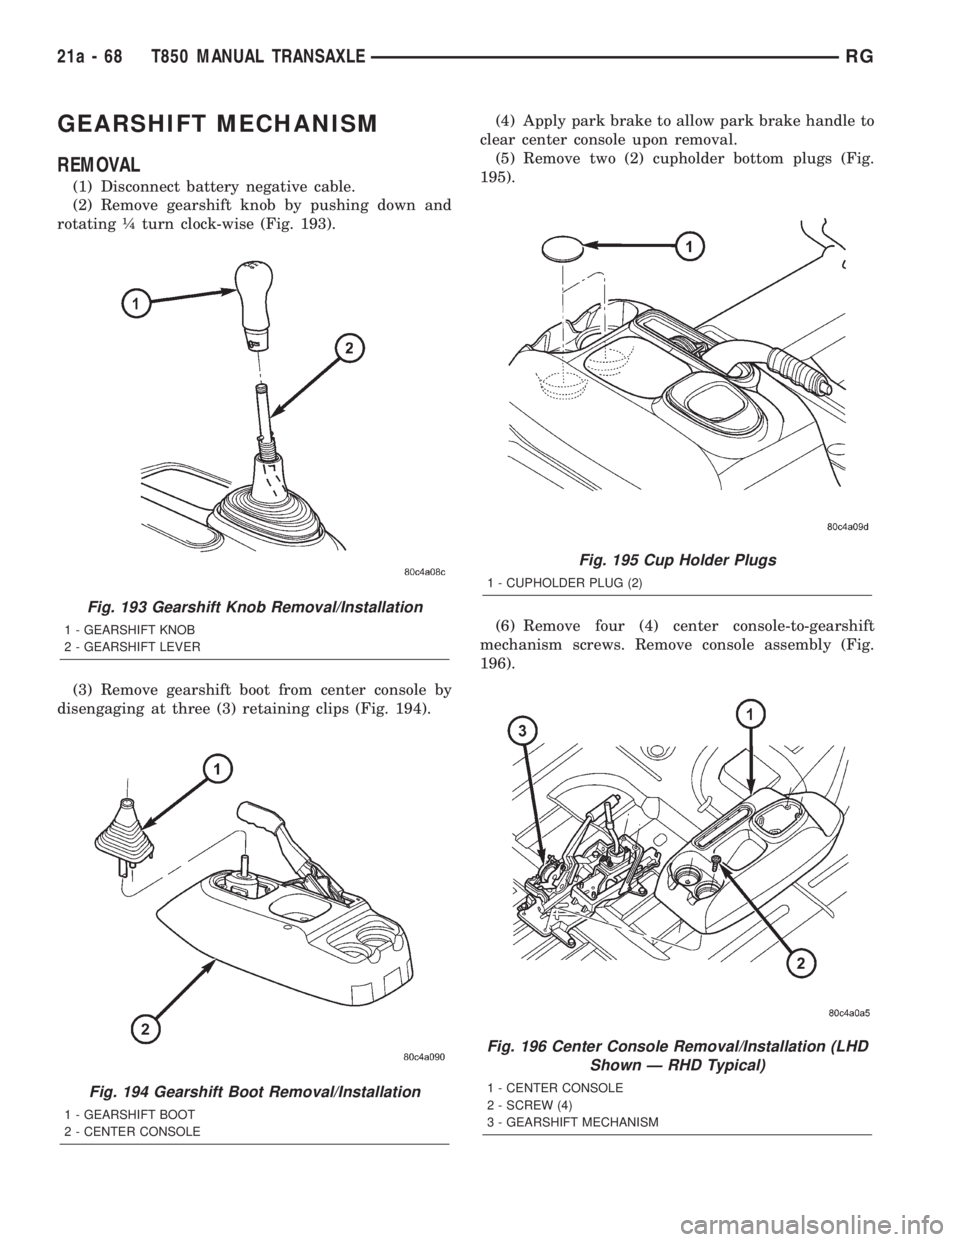 CHRYSLER VOYAGER 2001 Repair Manual GEARSHIFT MECHANISM
REMOVAL
(1) Disconnect battery negative cable.
(2) Remove gearshift knob by pushing down and
rotating ò turn clock-wise (Fig. 193).
(3) Remove gearshift boot from center console b